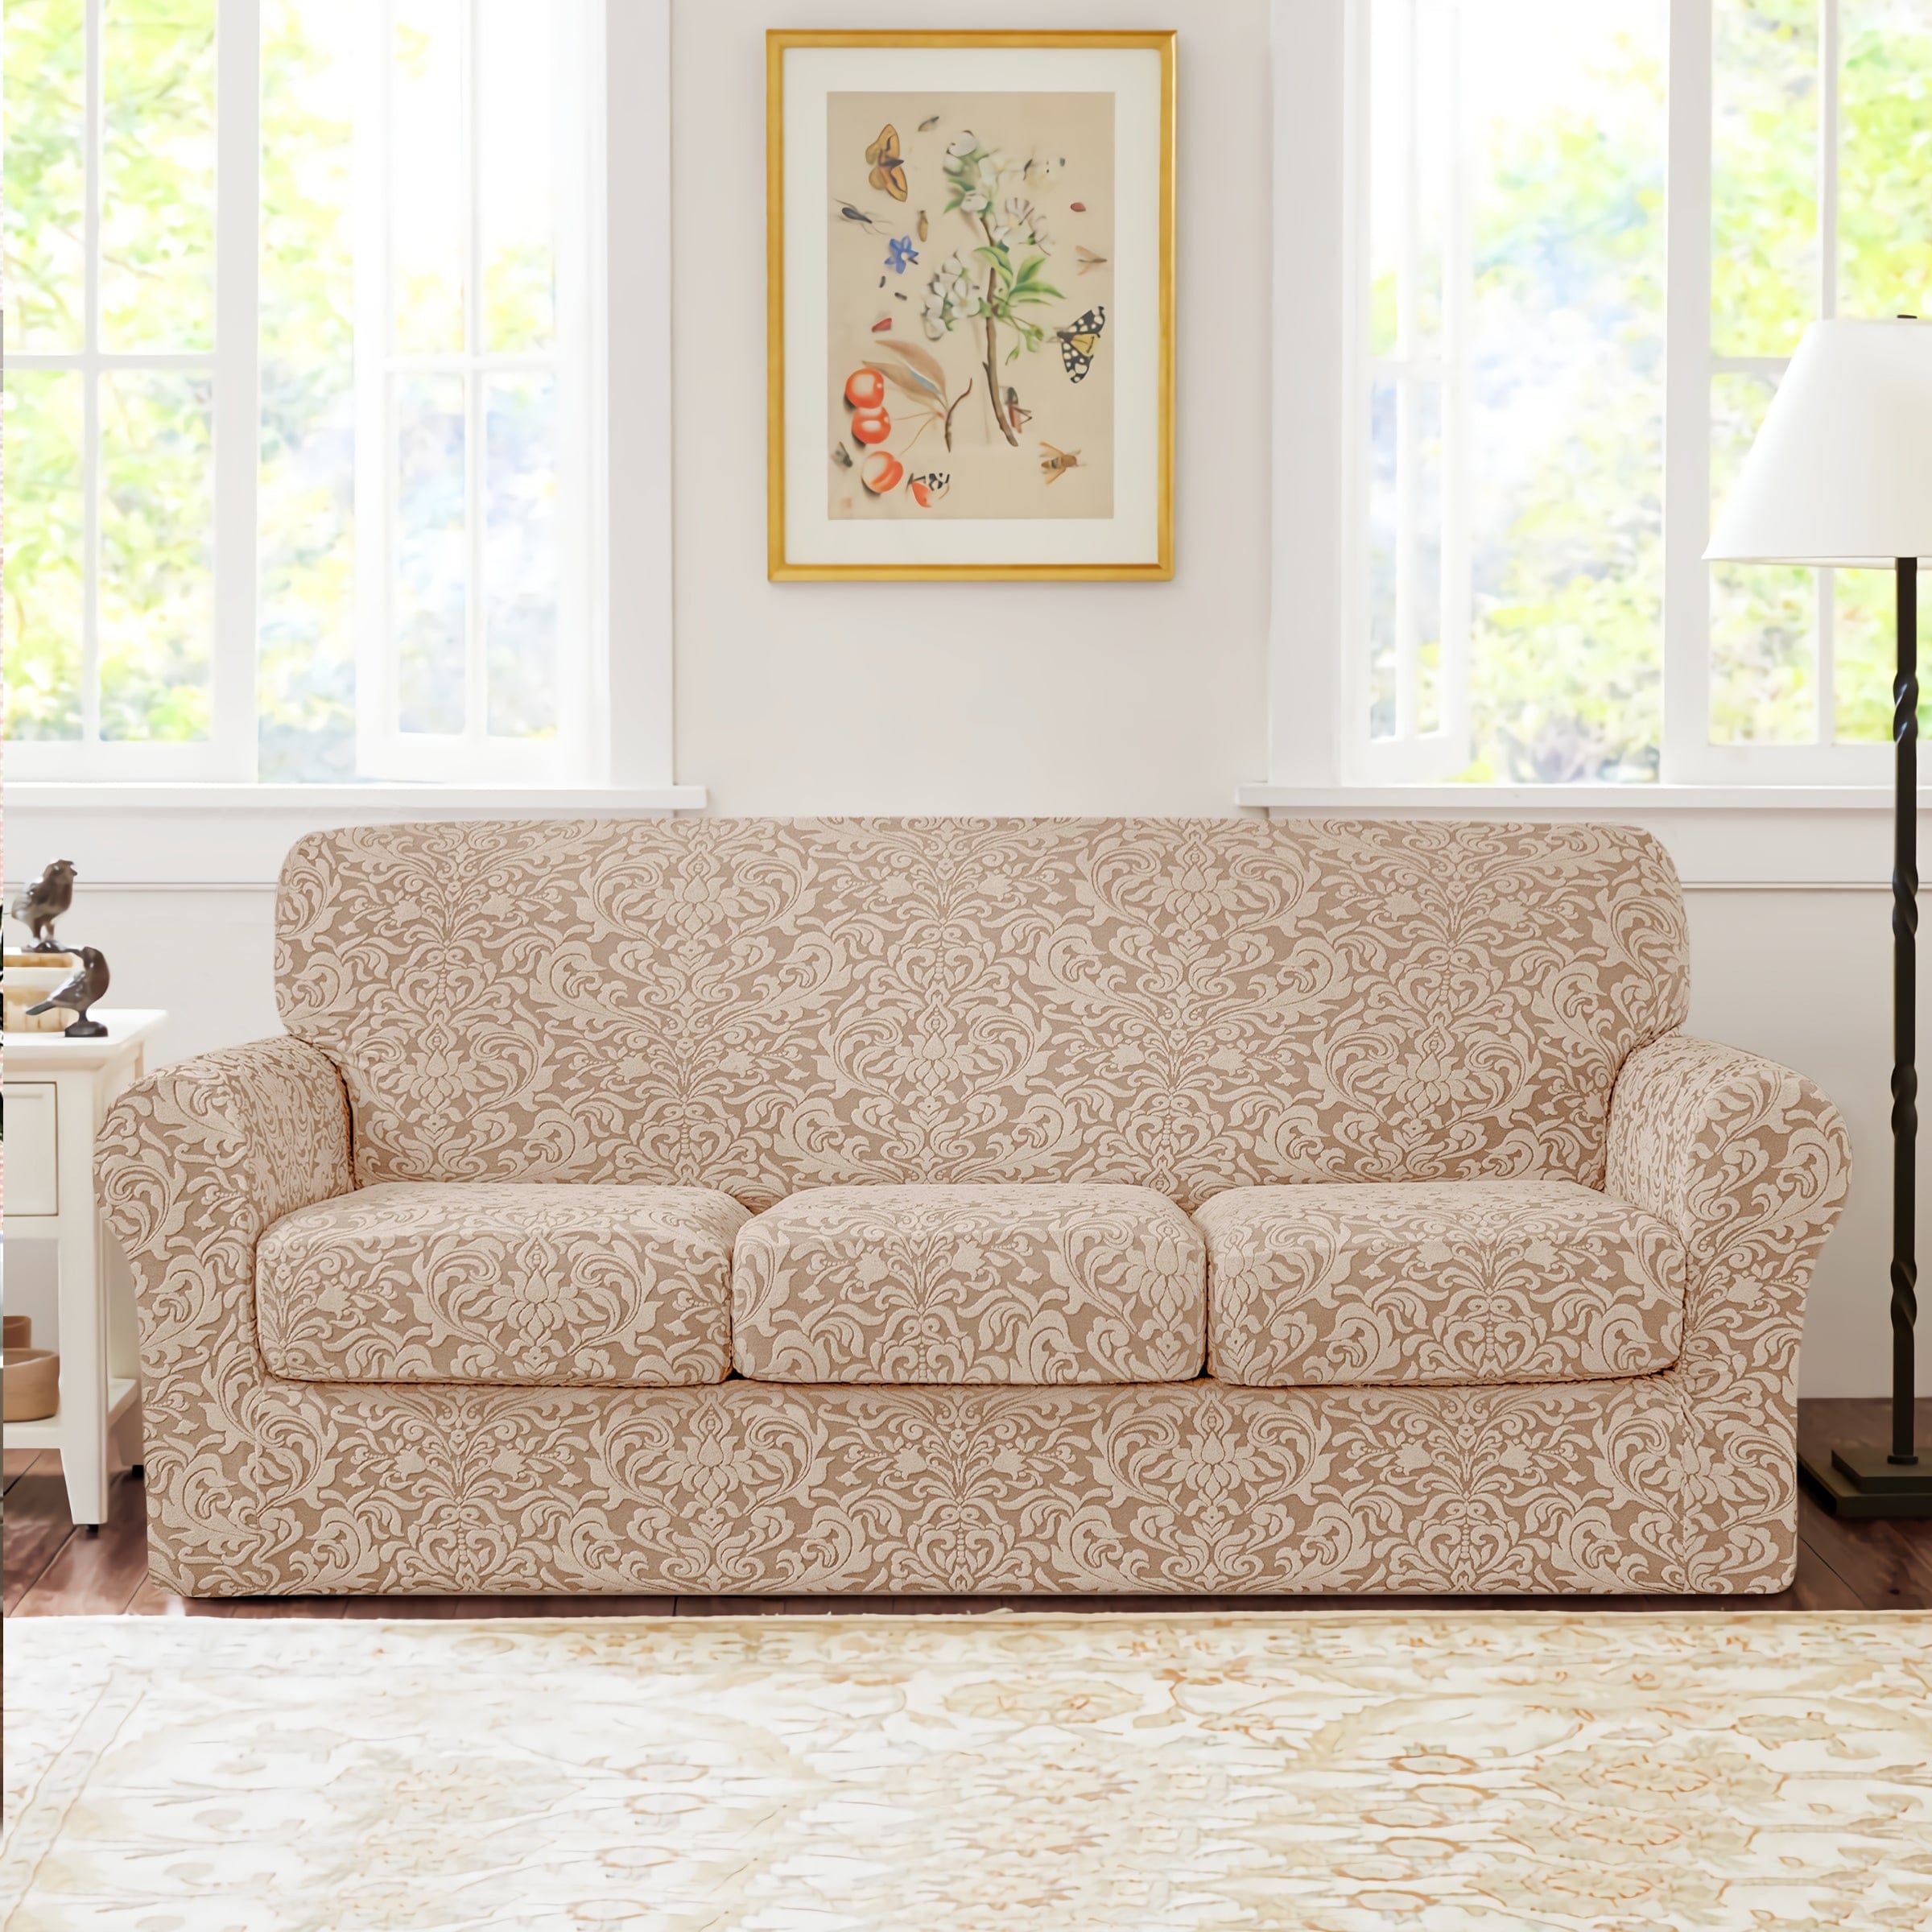 https://ak1.ostkcdn.com/images/products/is/images/direct/040aa51460beecc4987fdf5c2e99199ddf836b17/Subrtex-Jacquard-Damask-Sofa-Slipcover-Cover-with-3-Separate-Cushion-Cover.jpg